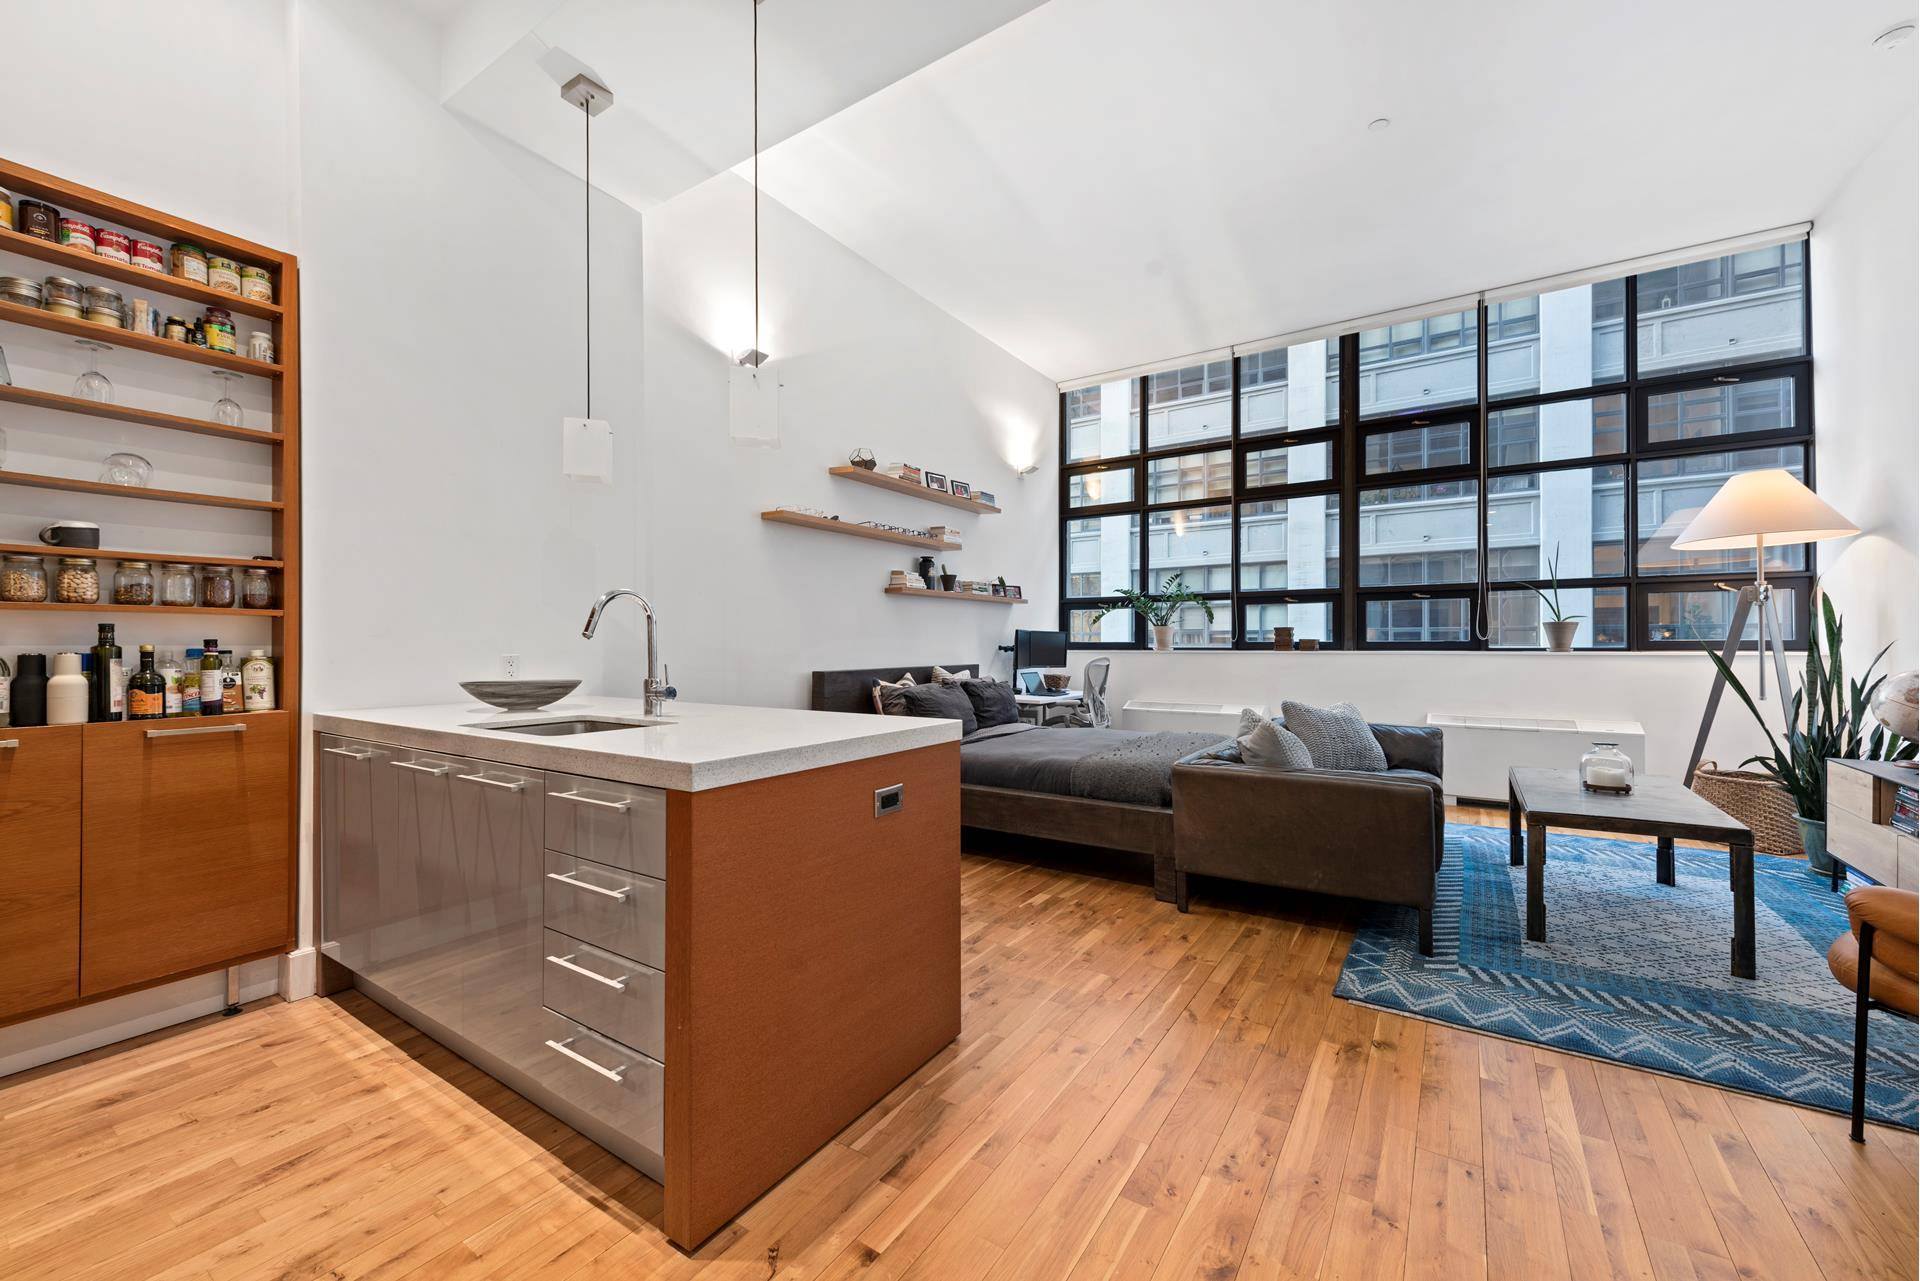 Come live in luxury on the waterfront in Brooklyn Bridge Park in this rarely available loft with 13' soaring ceilings.